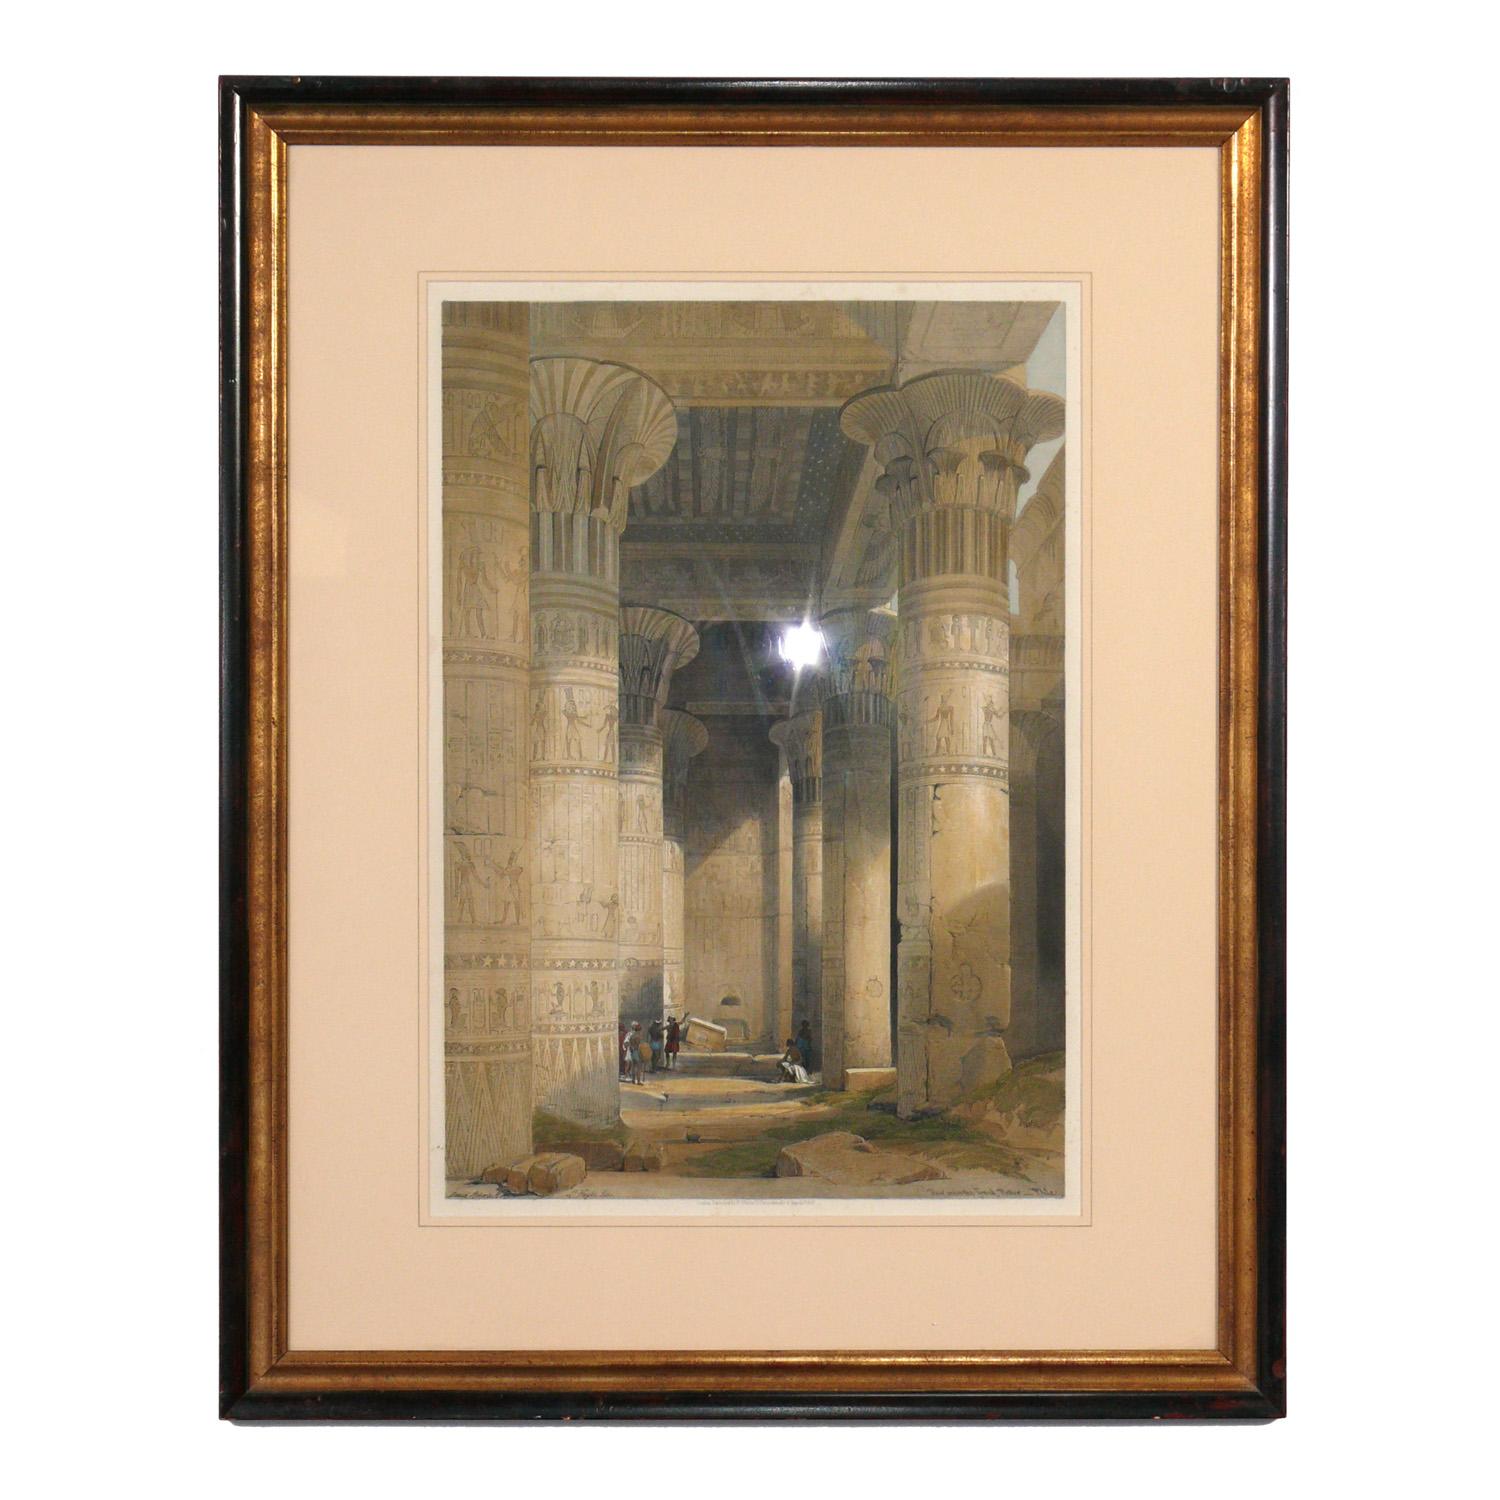 Group of two hand colored Egypt Lithographs, after David Roberts, English, circa 19th century. These were originally purchased at Ursus Gallery in New York City. They are professionally framed in gilt and deep ochre red bordered wood frames.